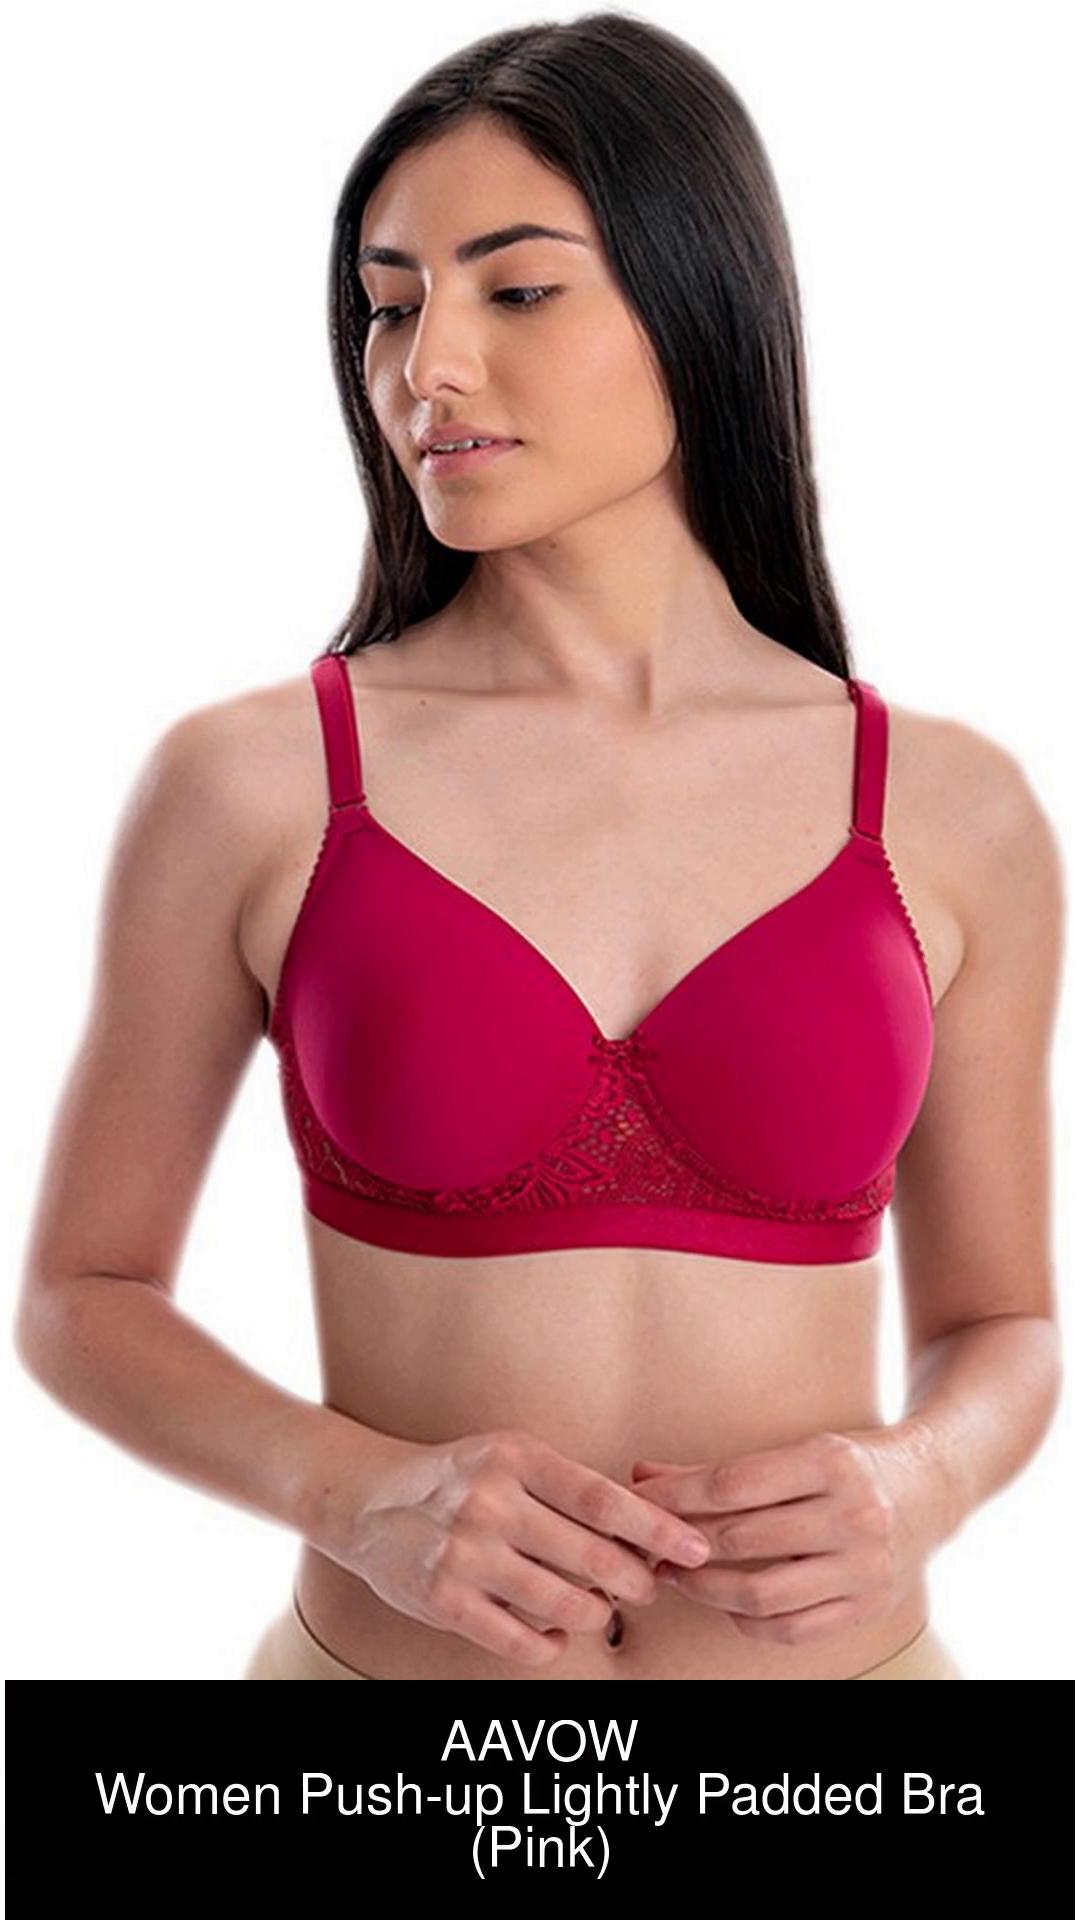 Buy AAVOW Women Push-up Lightly Padded Bra Online at Best Prices in India